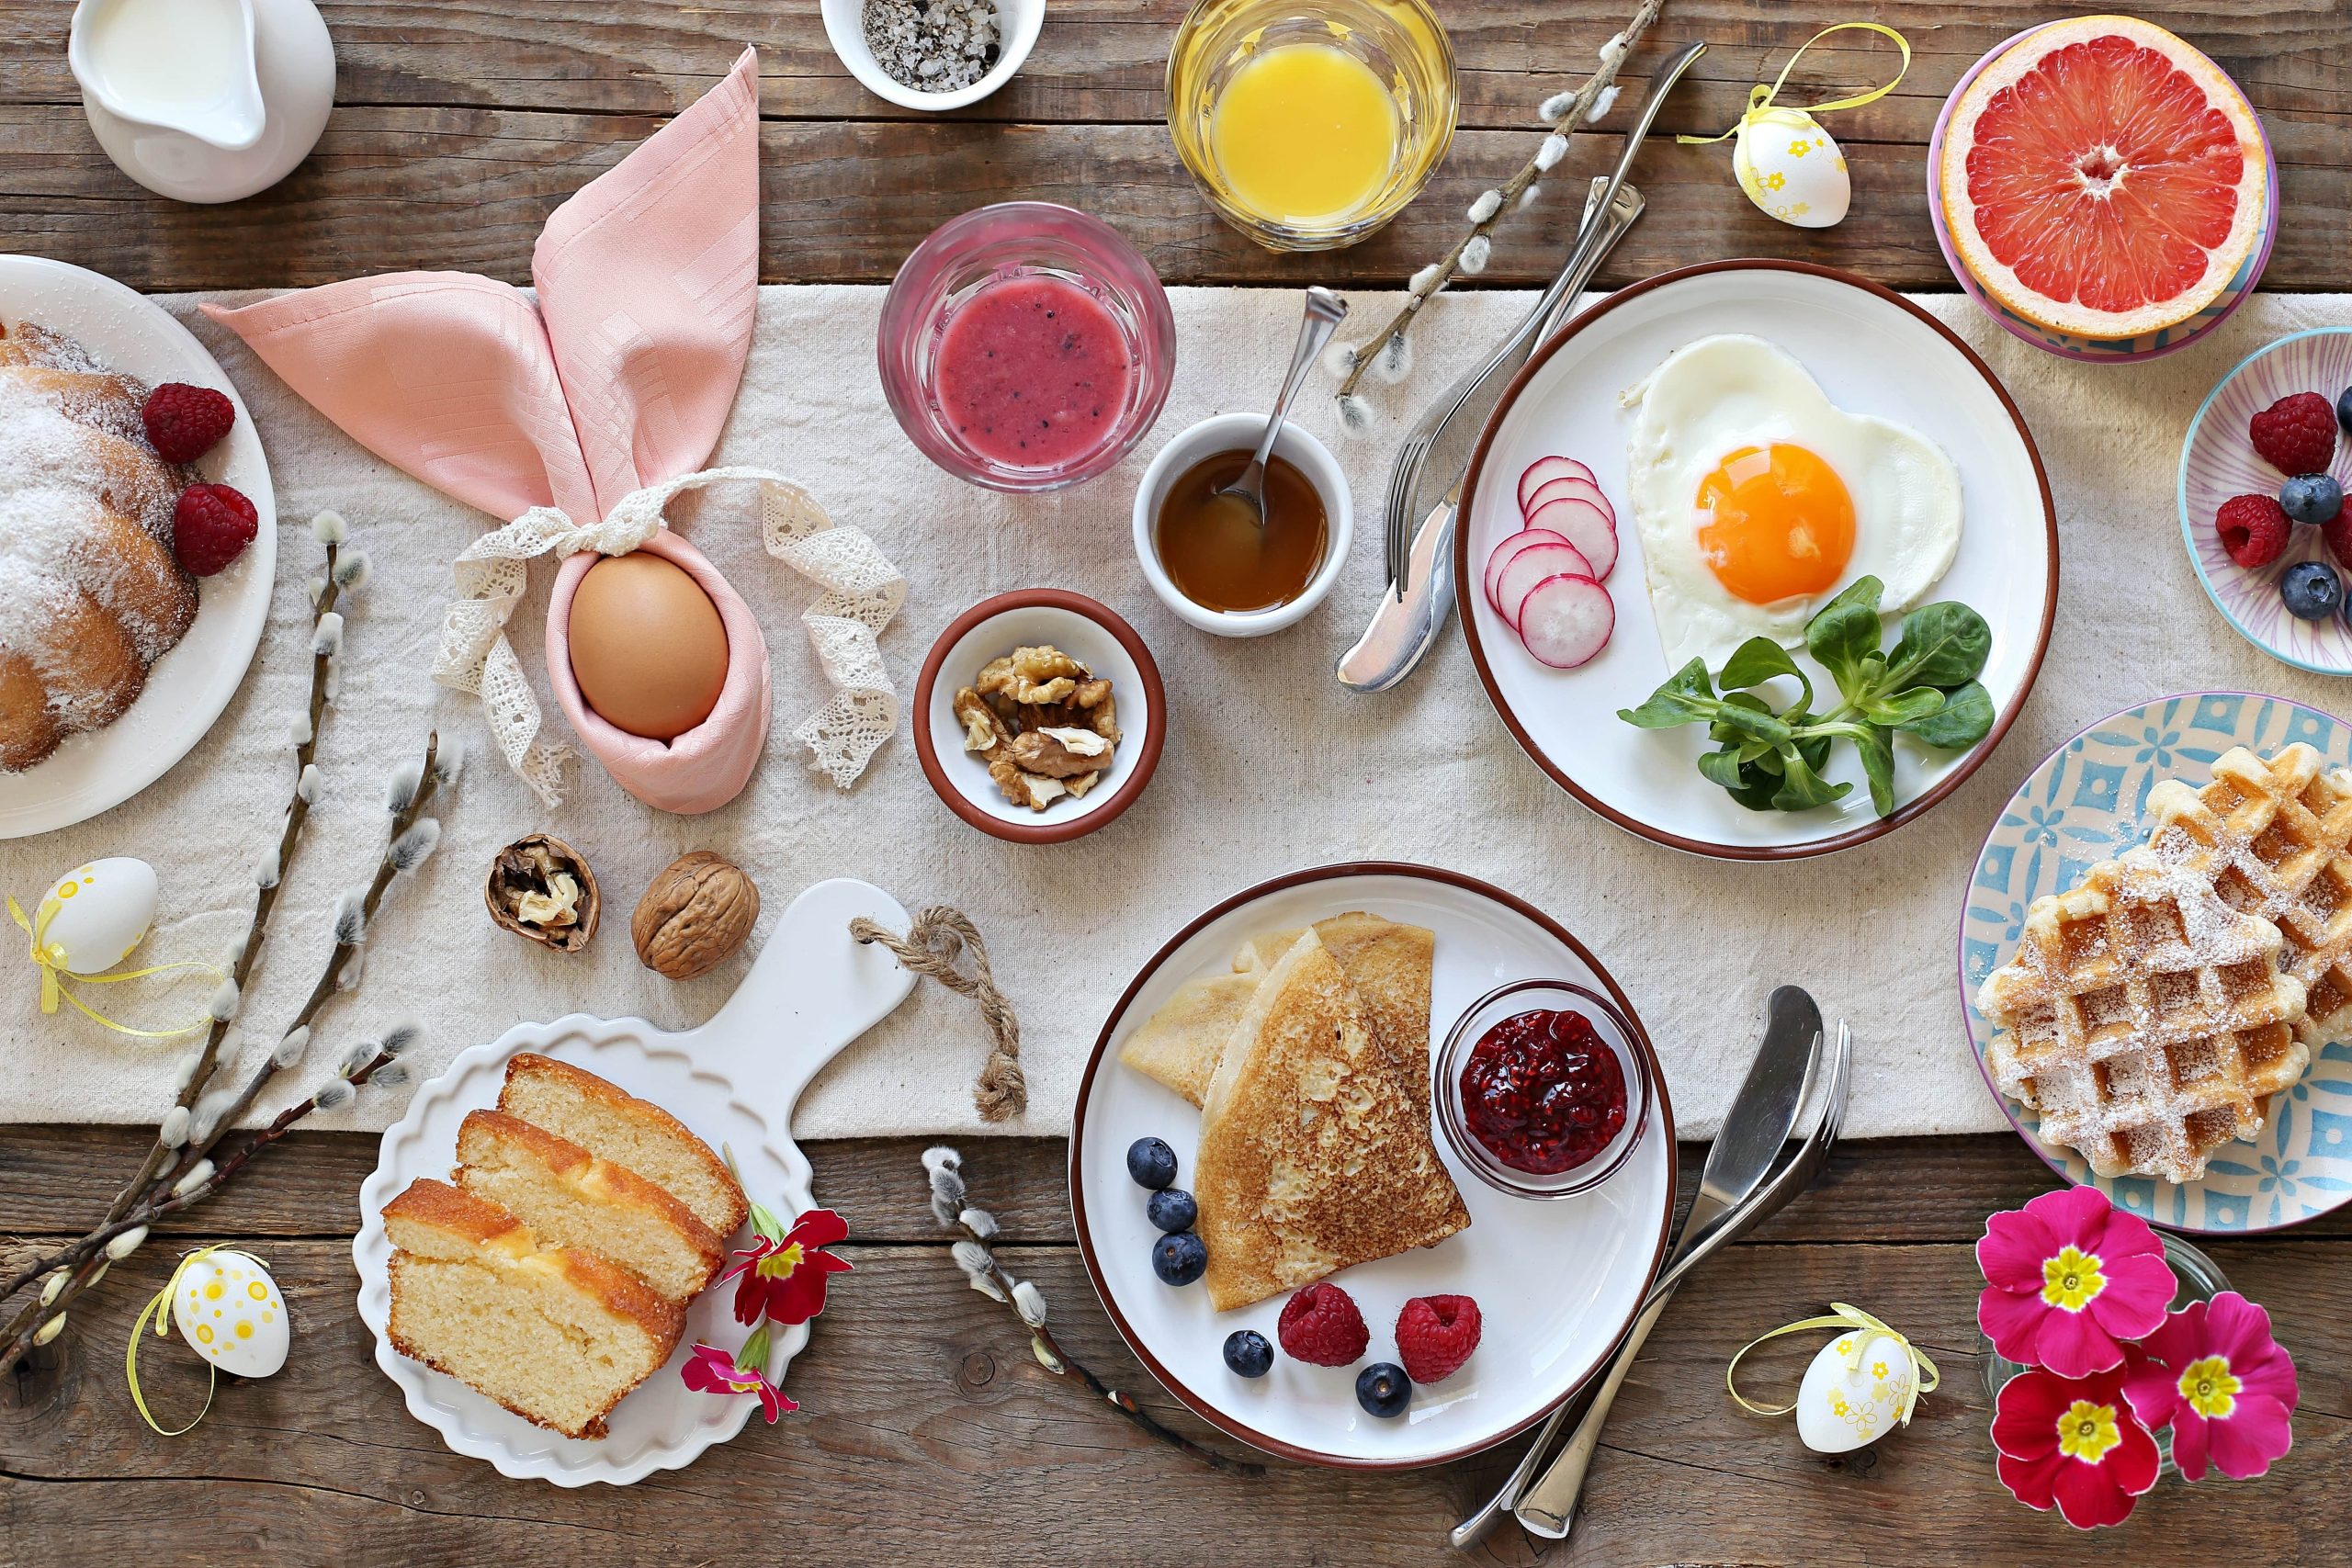 Best Easter Brunch Spots Around The Abby - The Abby